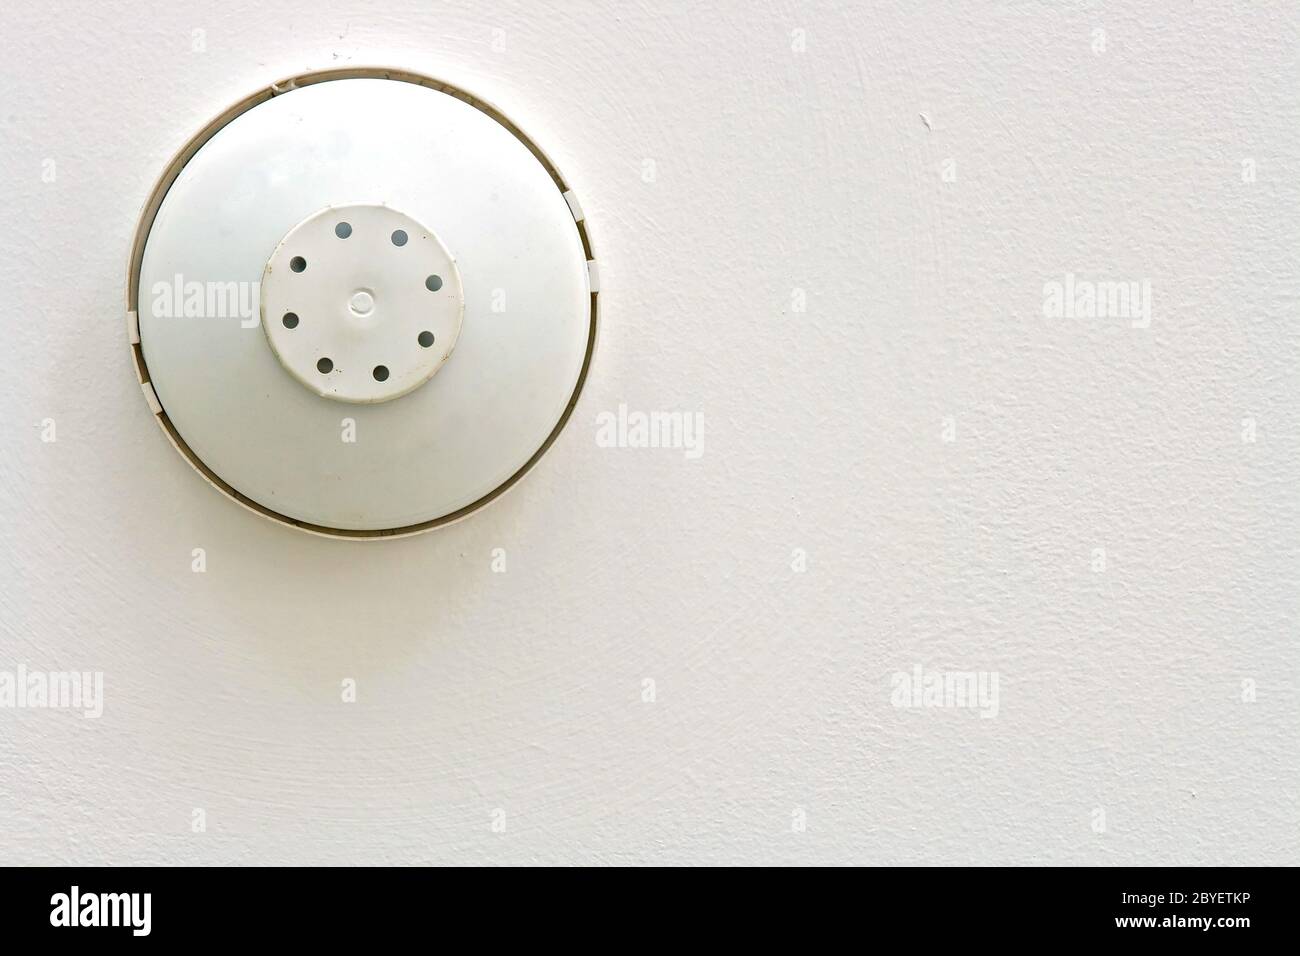 Smoke and heat alarm detecter isolated on white ceiling Stock Photo